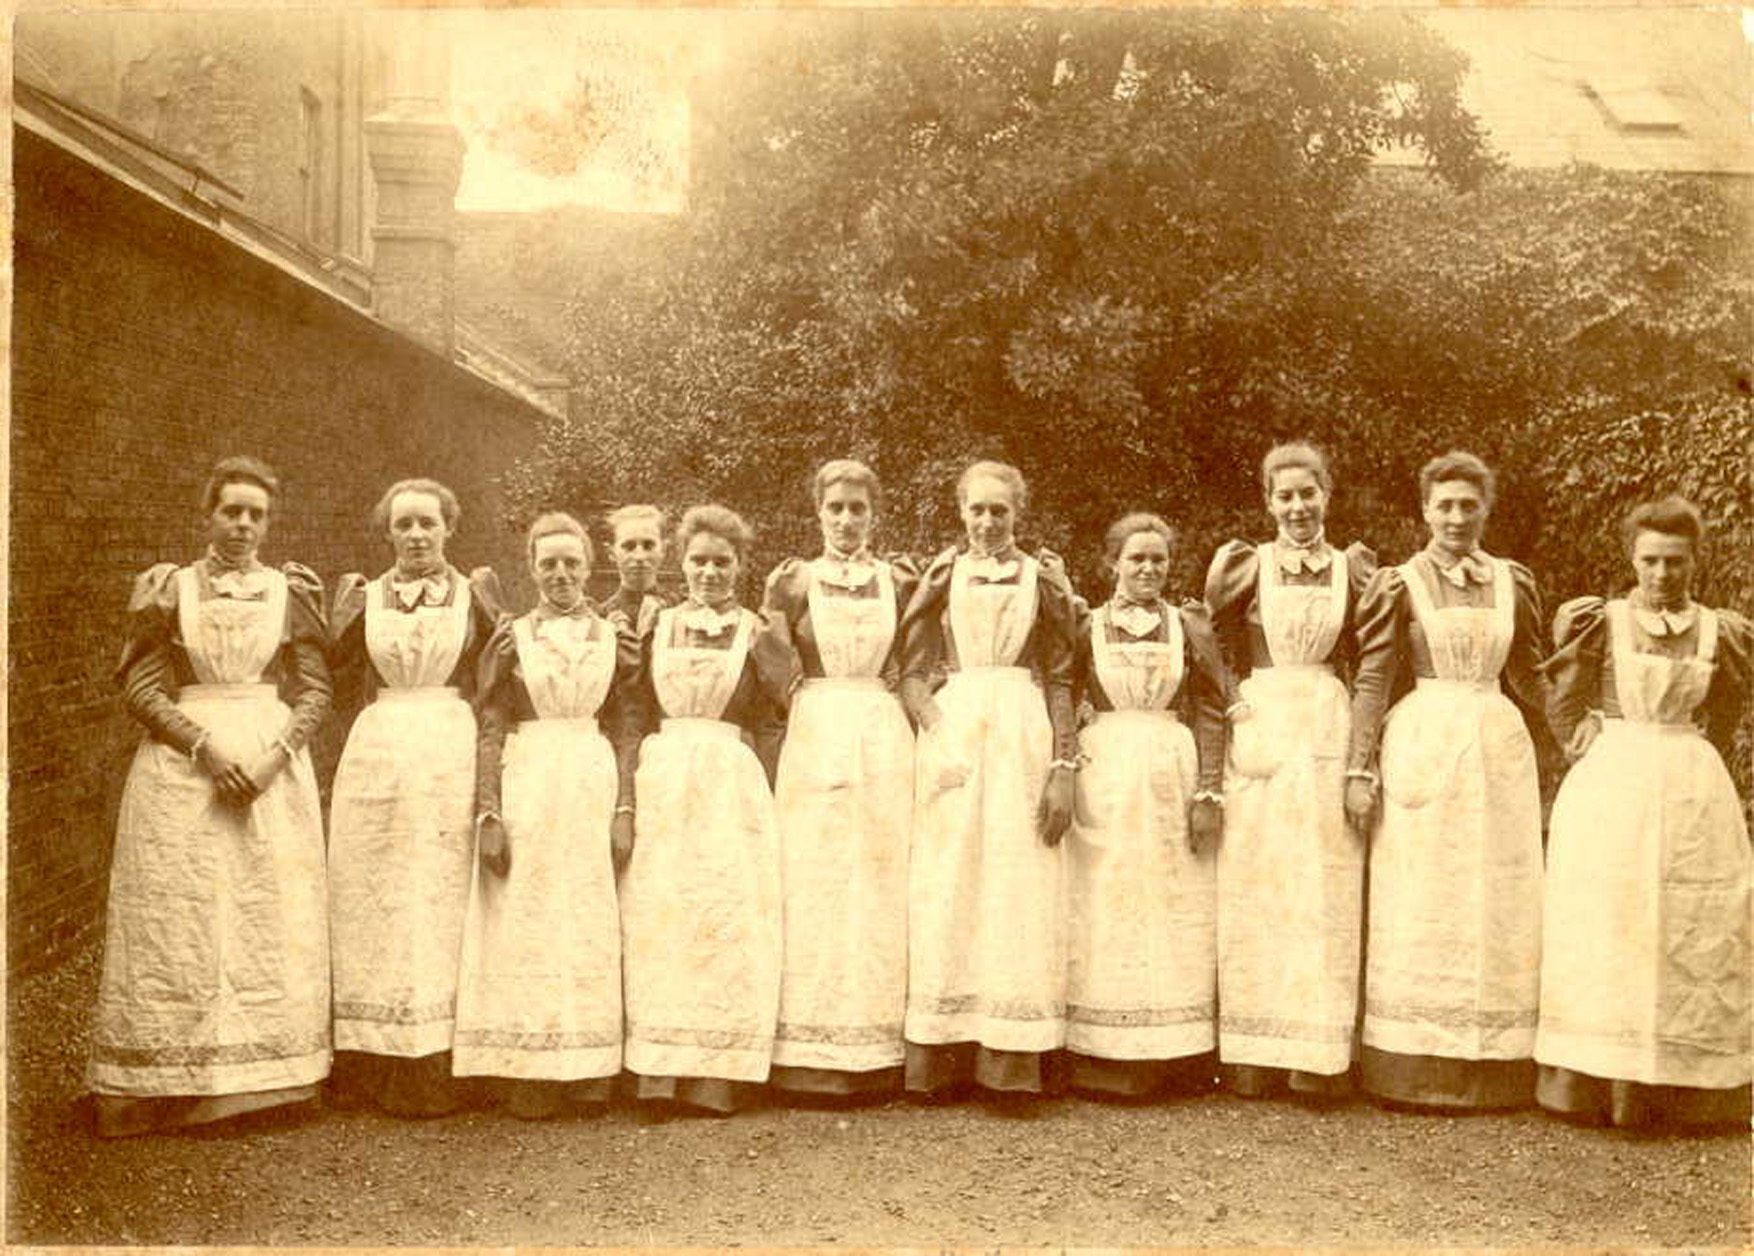 This photo, 1892, depicts the first trained Norland Nannies wearing fashionable dresses with puffed gigot sleeves, the brown fabric distinguishing them from other domestic servants. -Norland College